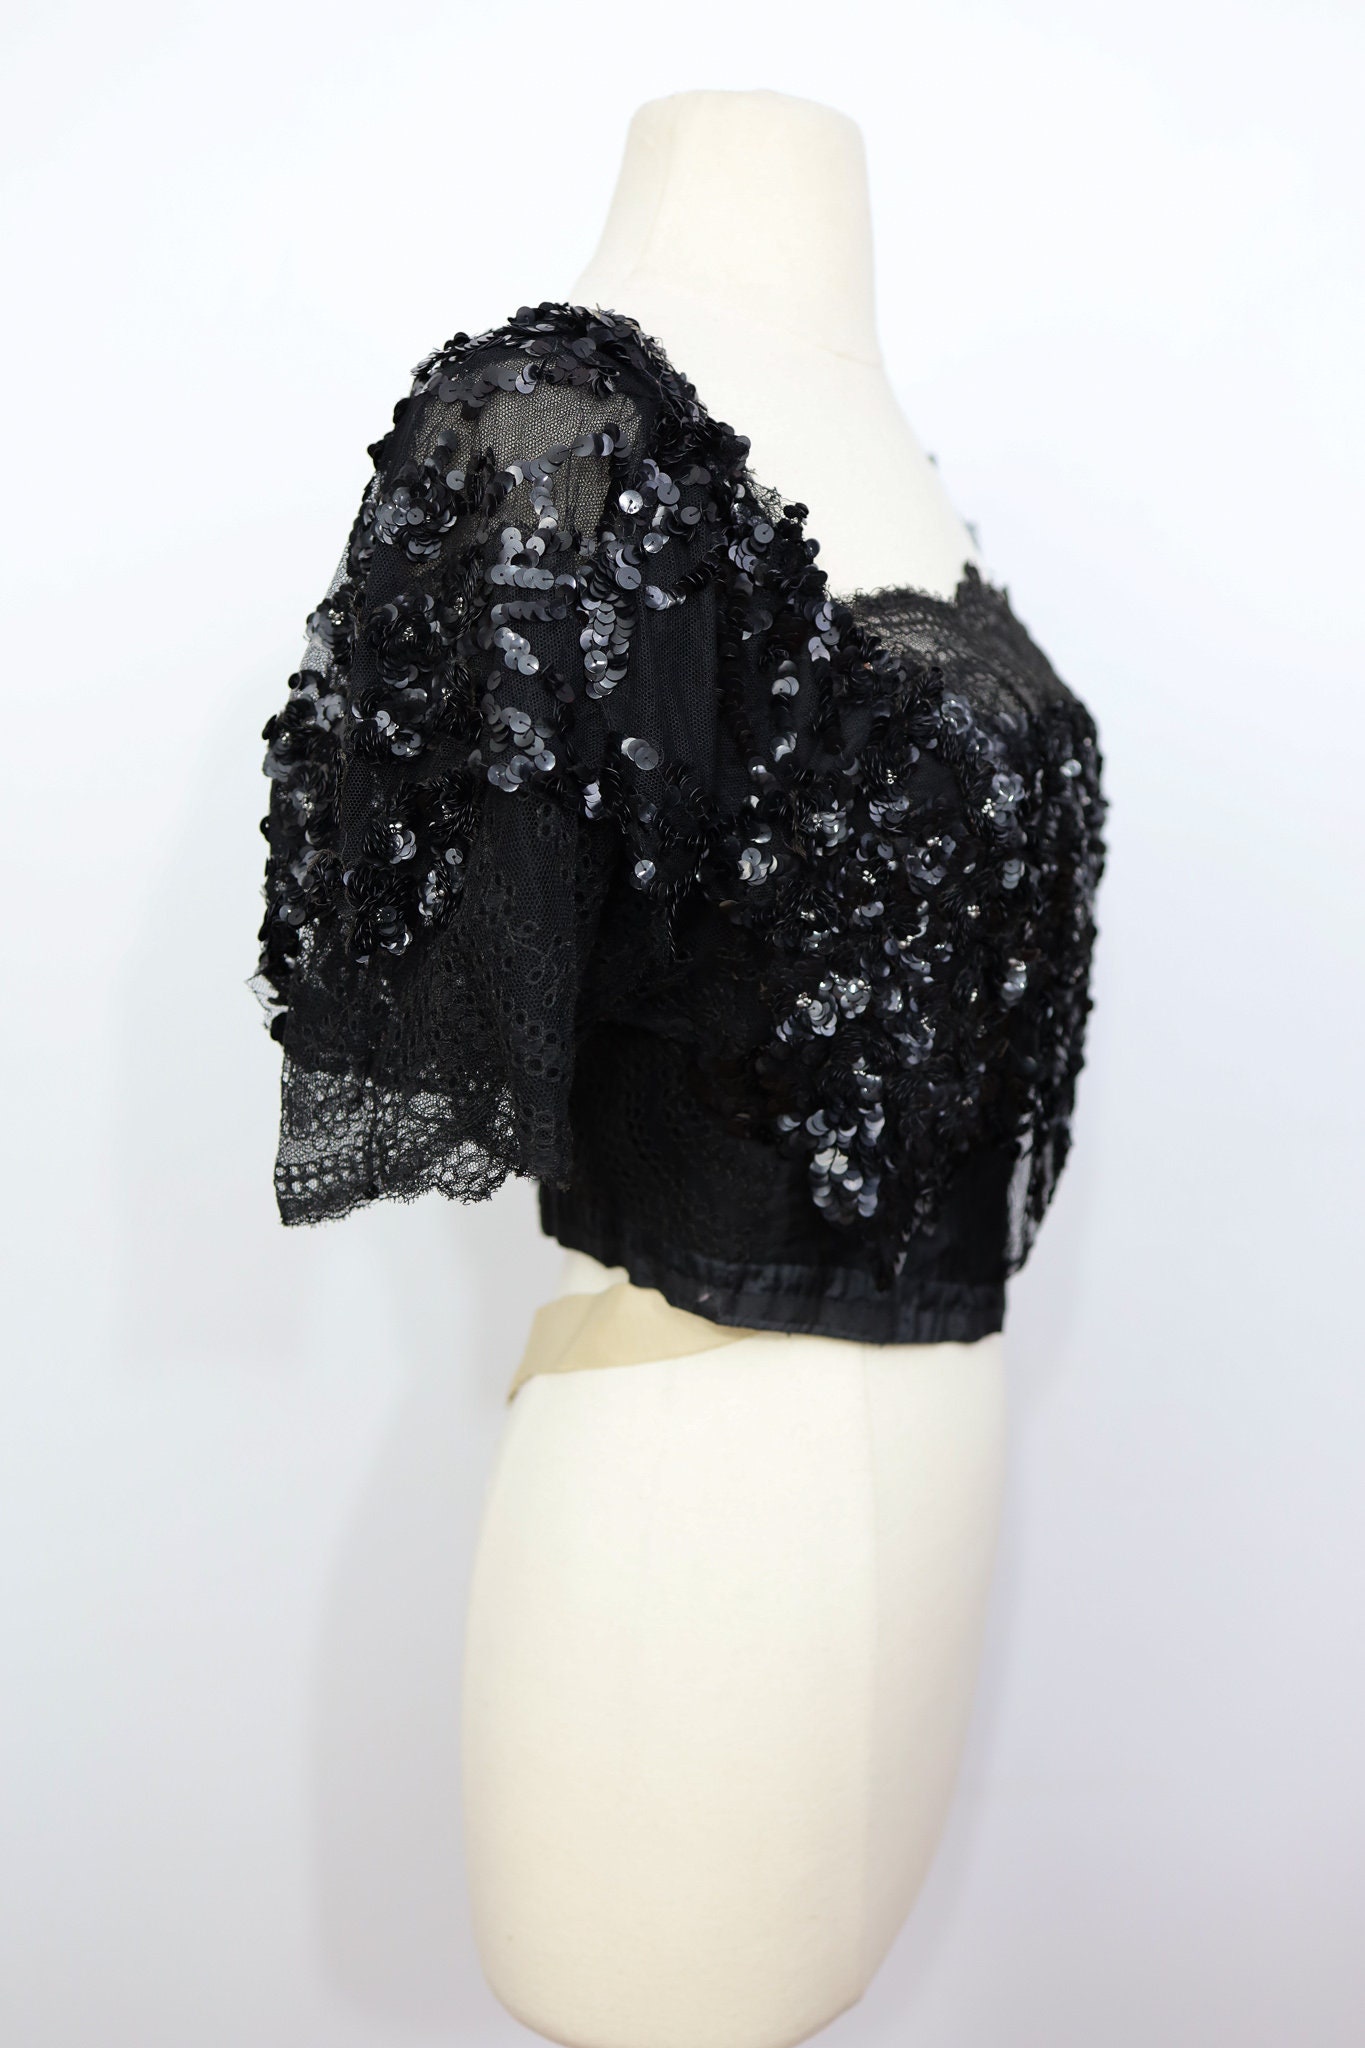 Late 1800s/early 1900s Edwardian Black Lace & Sequins Bodice//19th ...